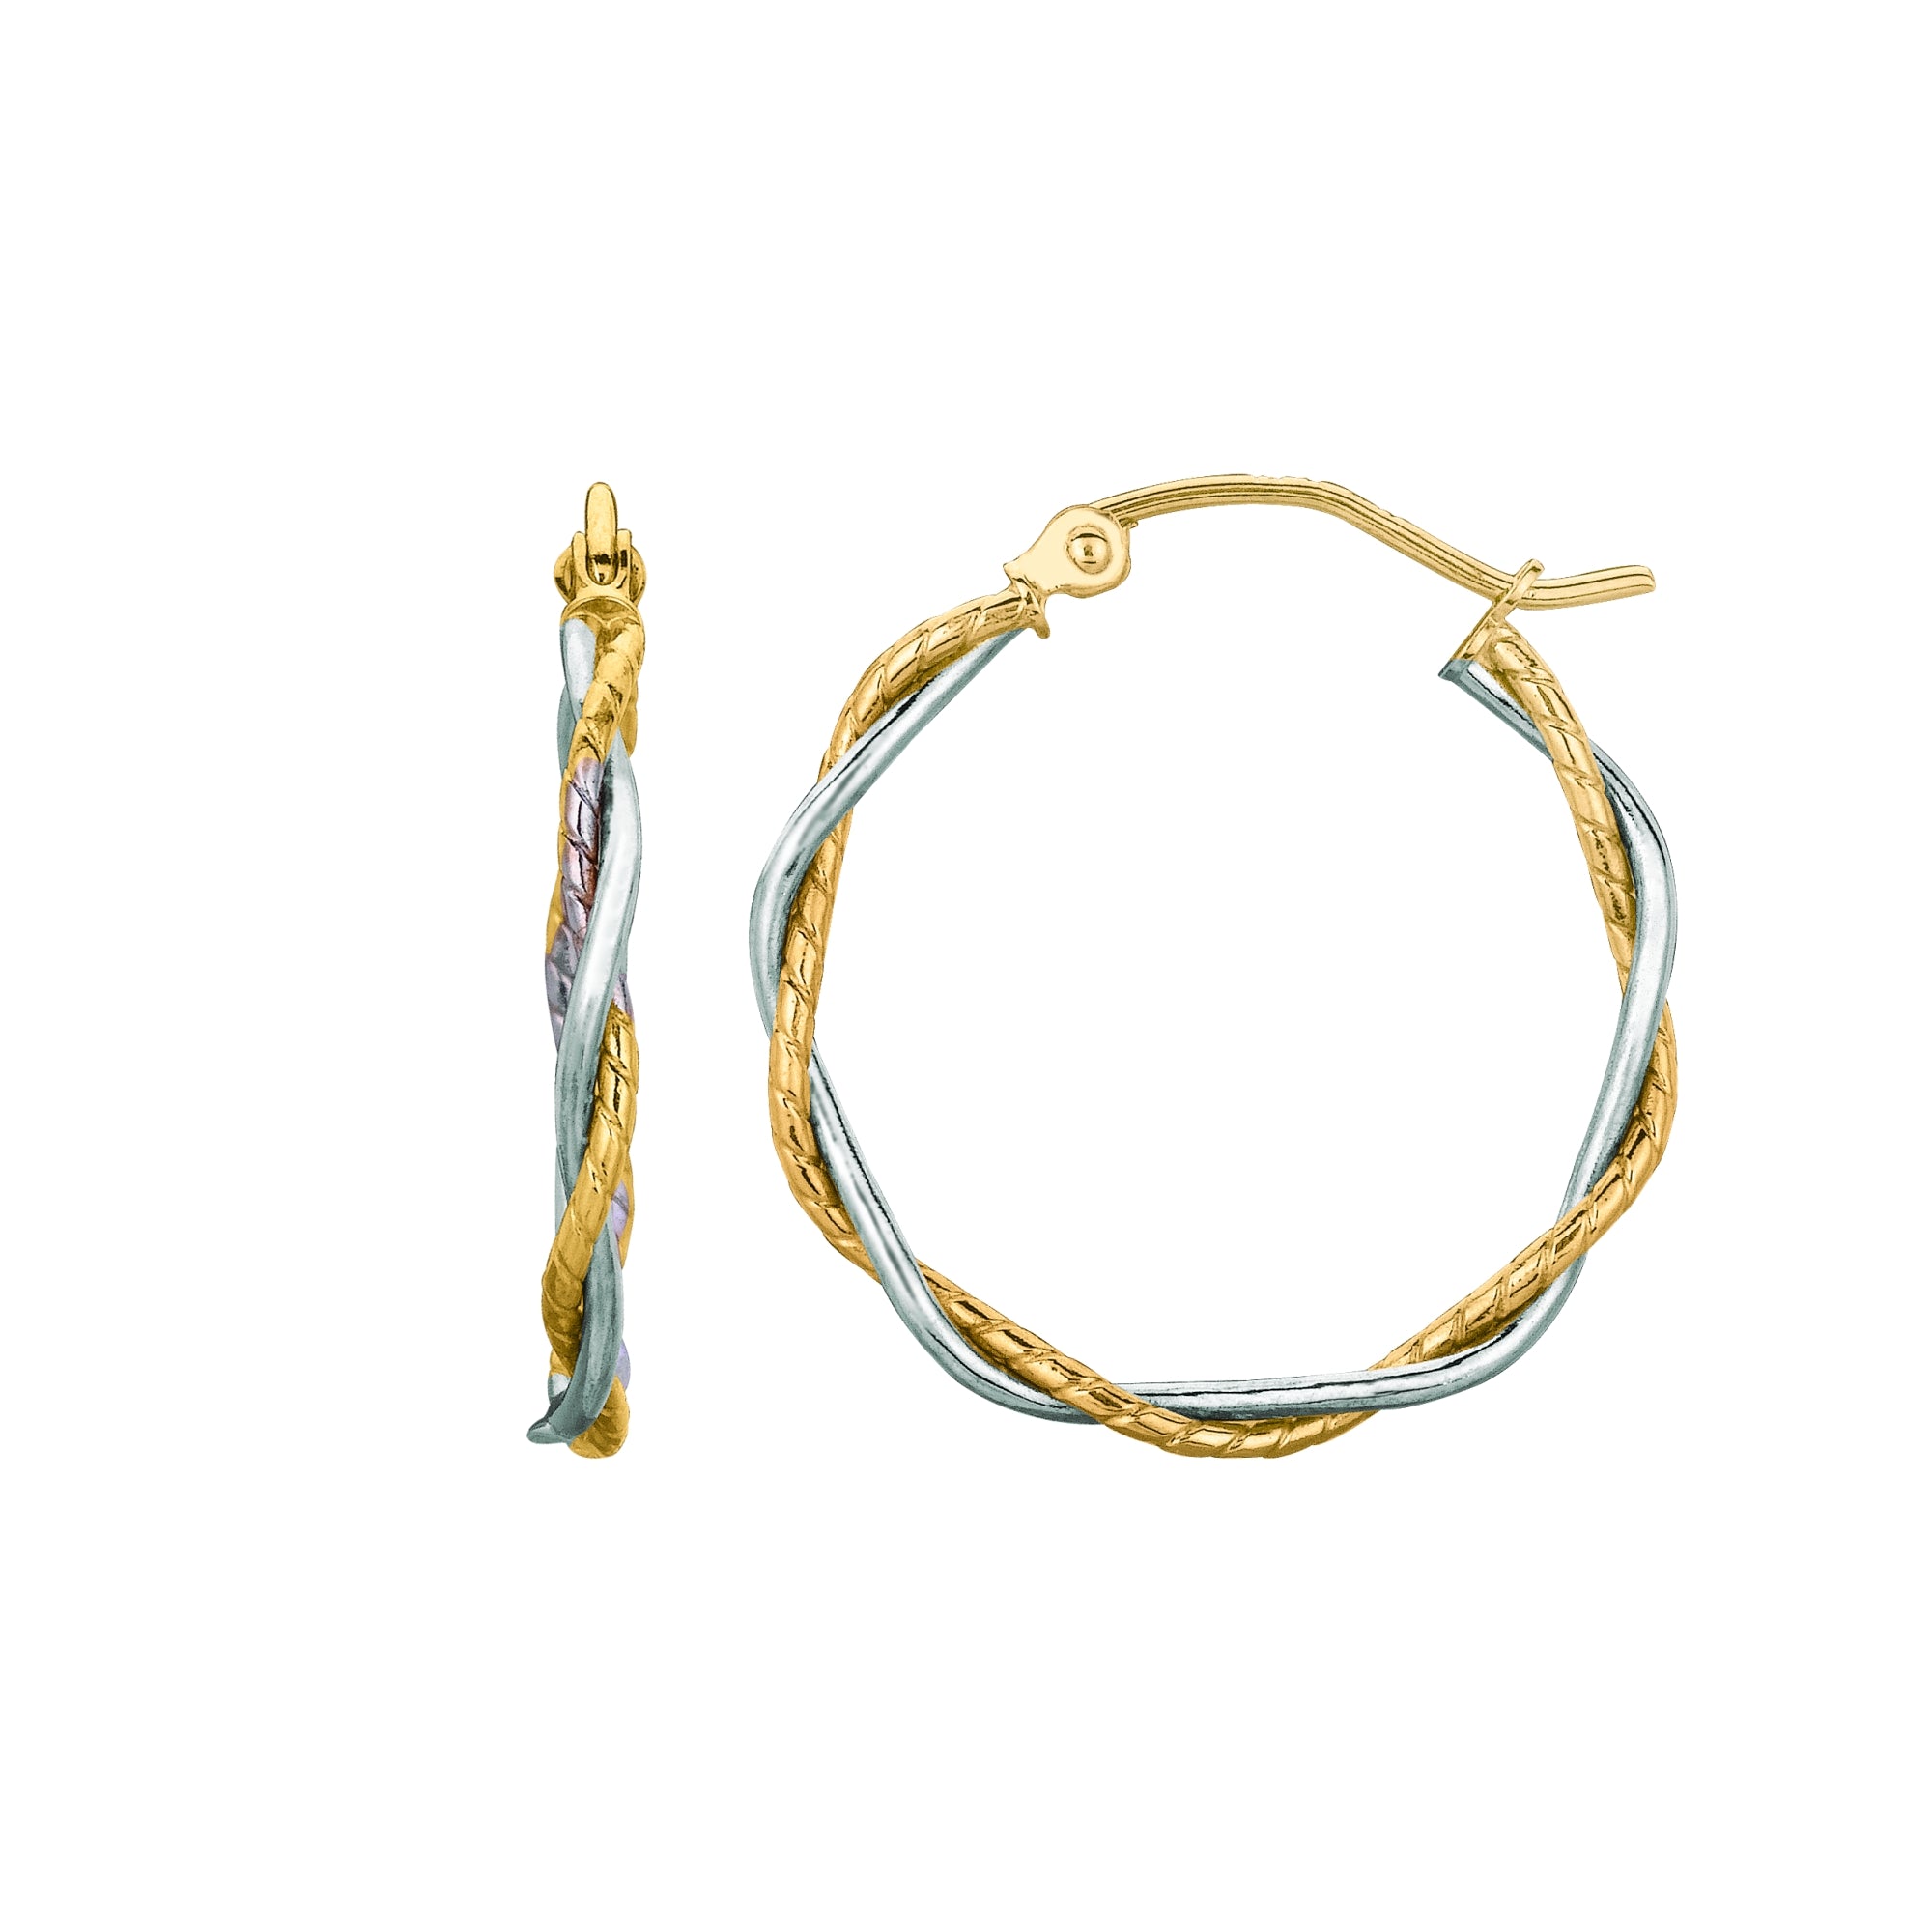 14K Yellow And White Gold Twisted Hoop Earrings, Diameter 25mm fine designer jewelry for men and women